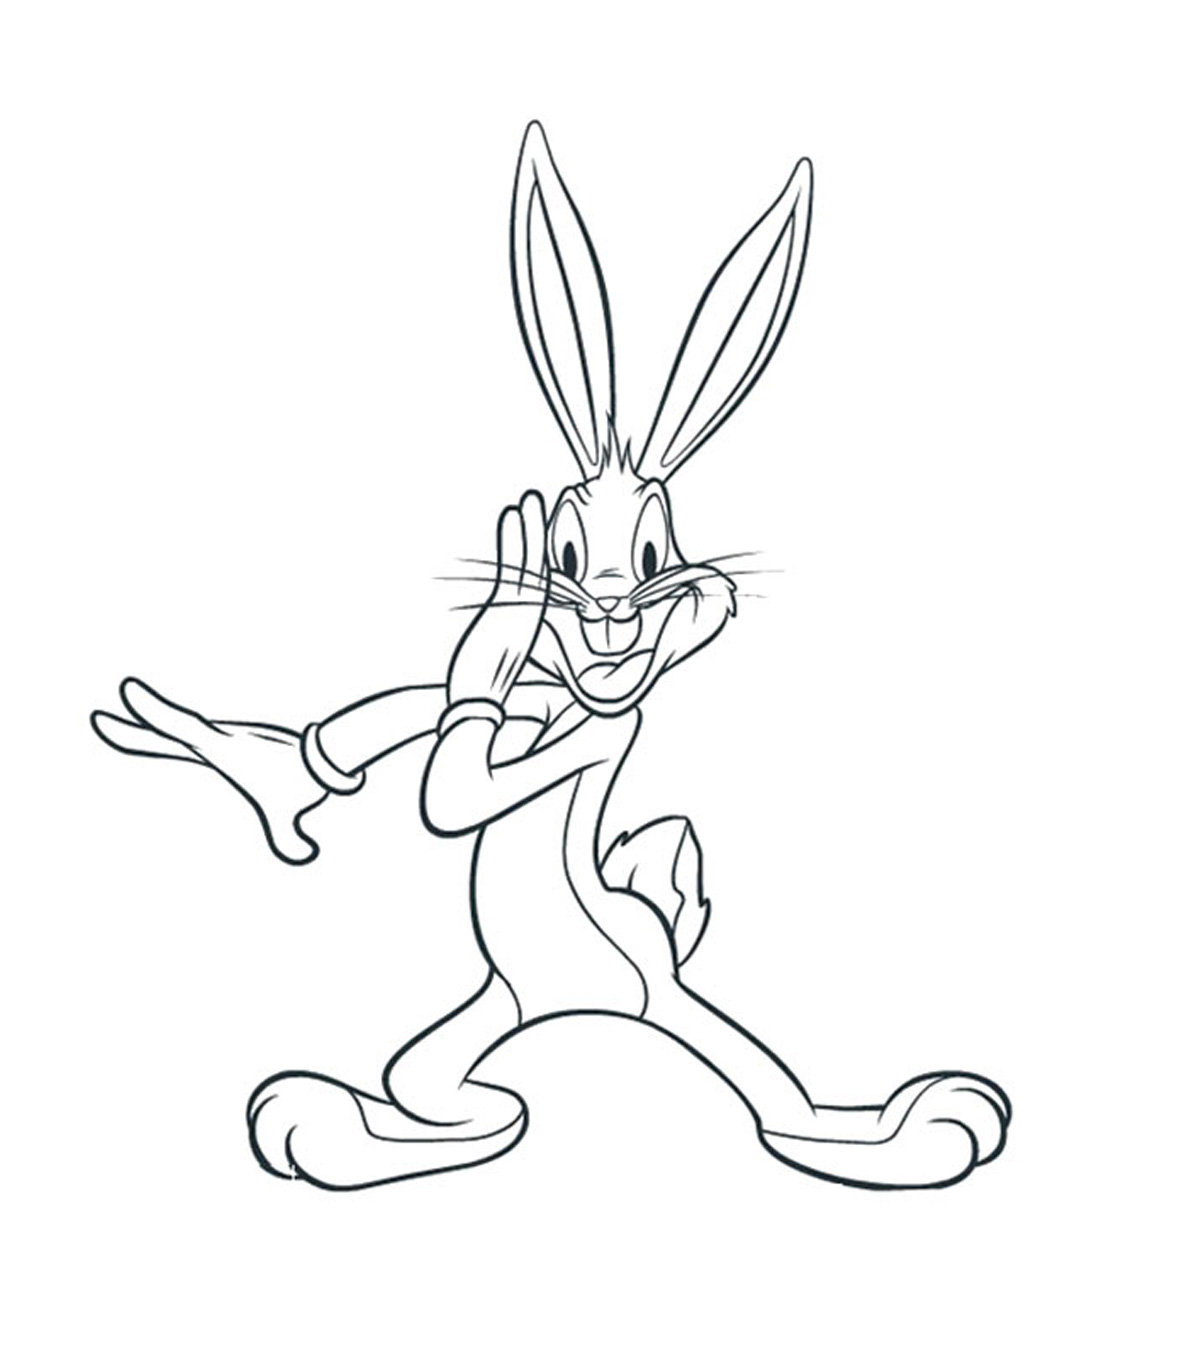 Elmer Fudd Coloring Pages Top 25 Free Printable Bugs Bunny Coloring Pages Online